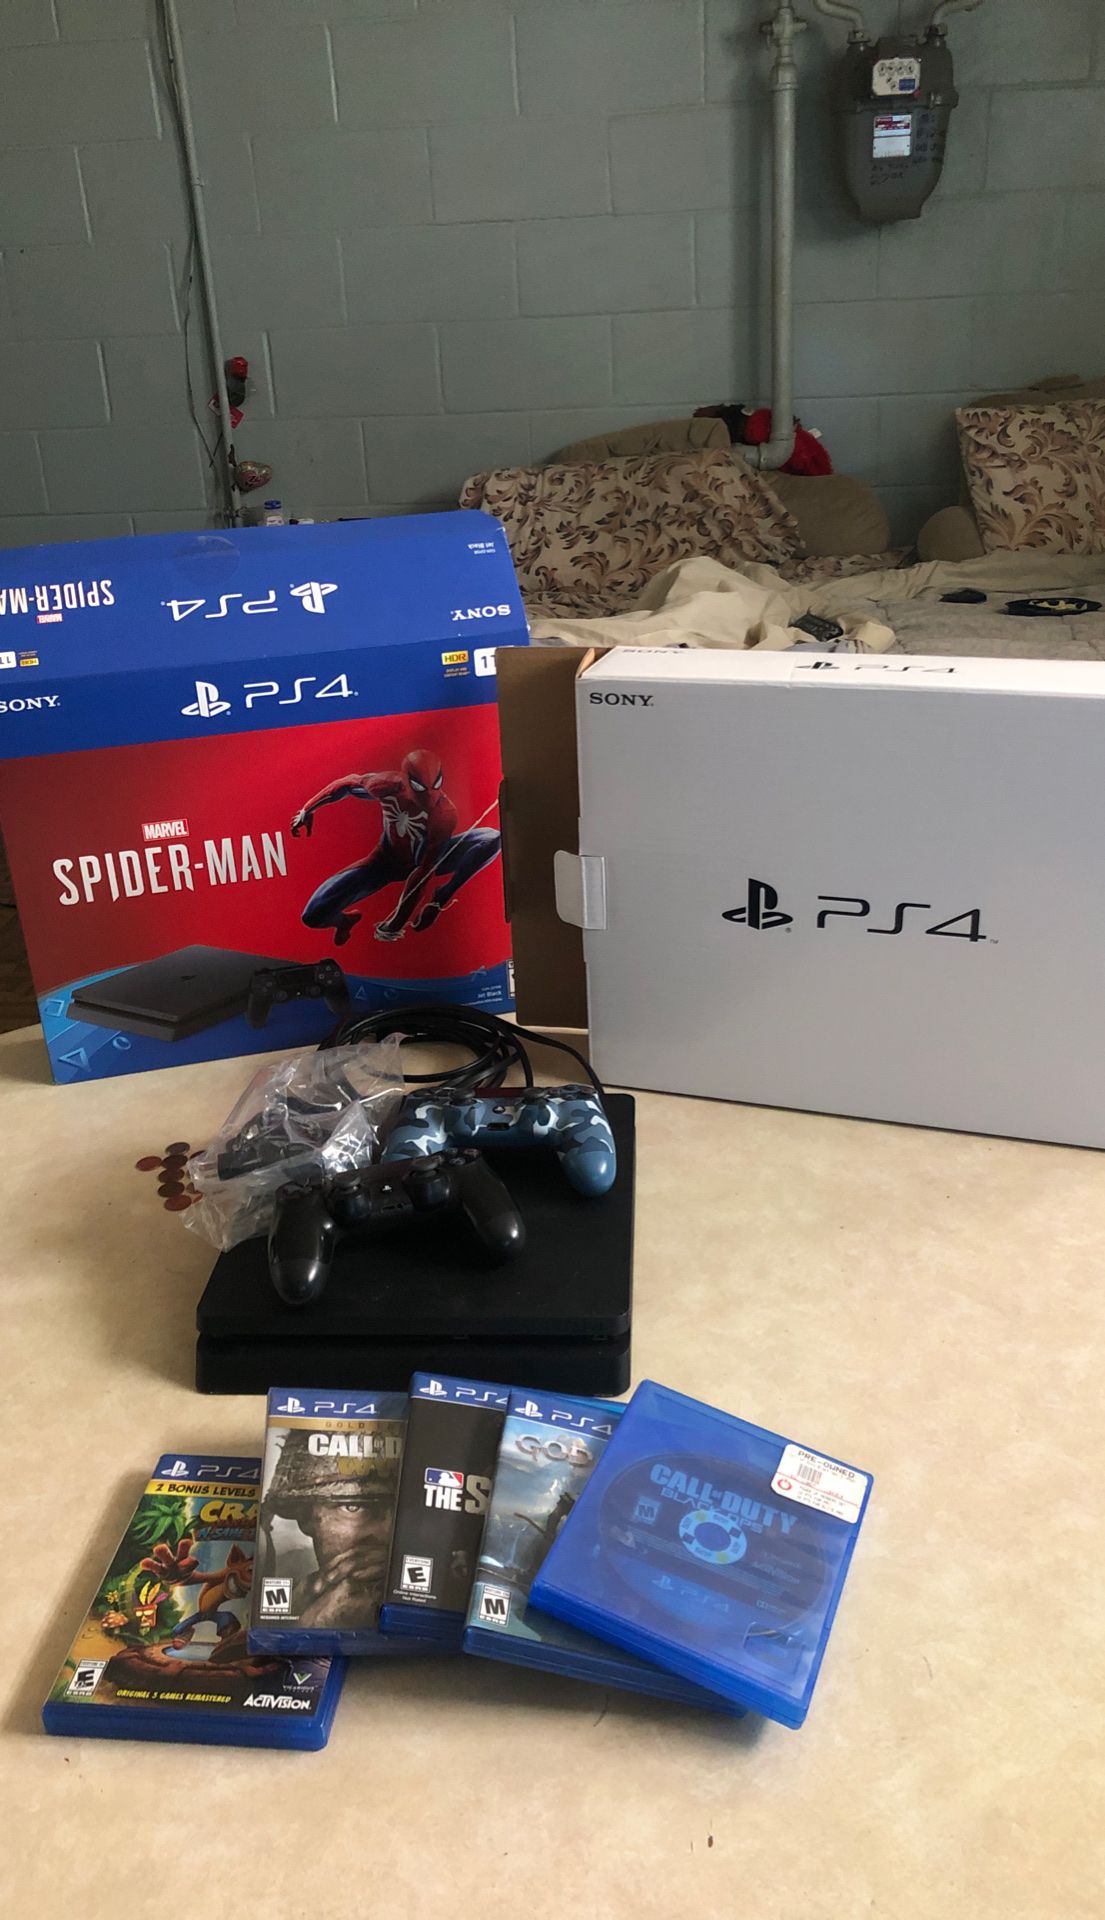 PS4 slim 1tb 6 games 2 controllers need to reinstall PS4 7.02